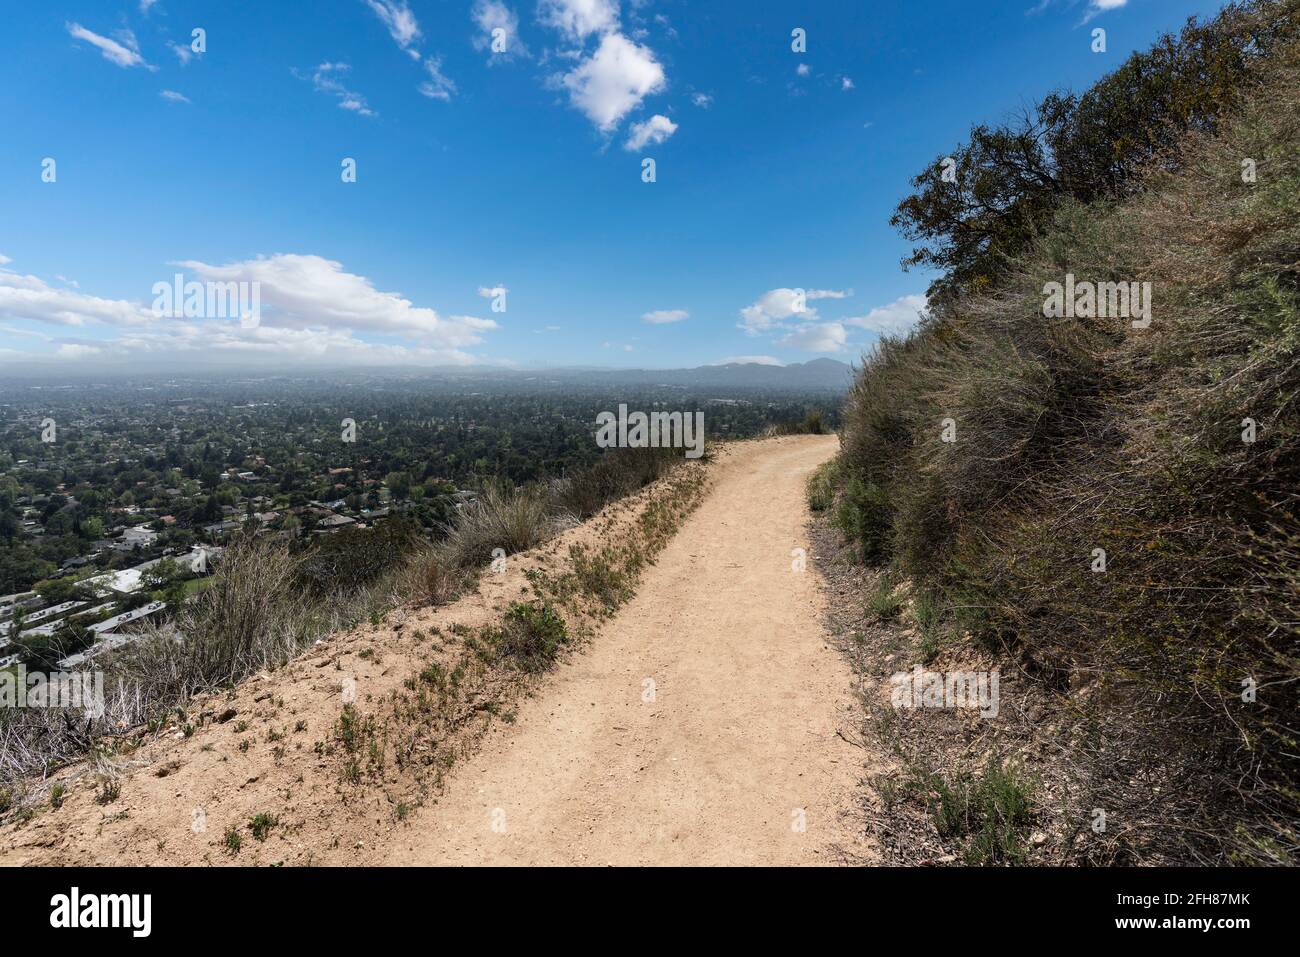 View of the Altadena Crest Trail in the San Gabriel Mountains of Los Angeles County, California. Stock Photo